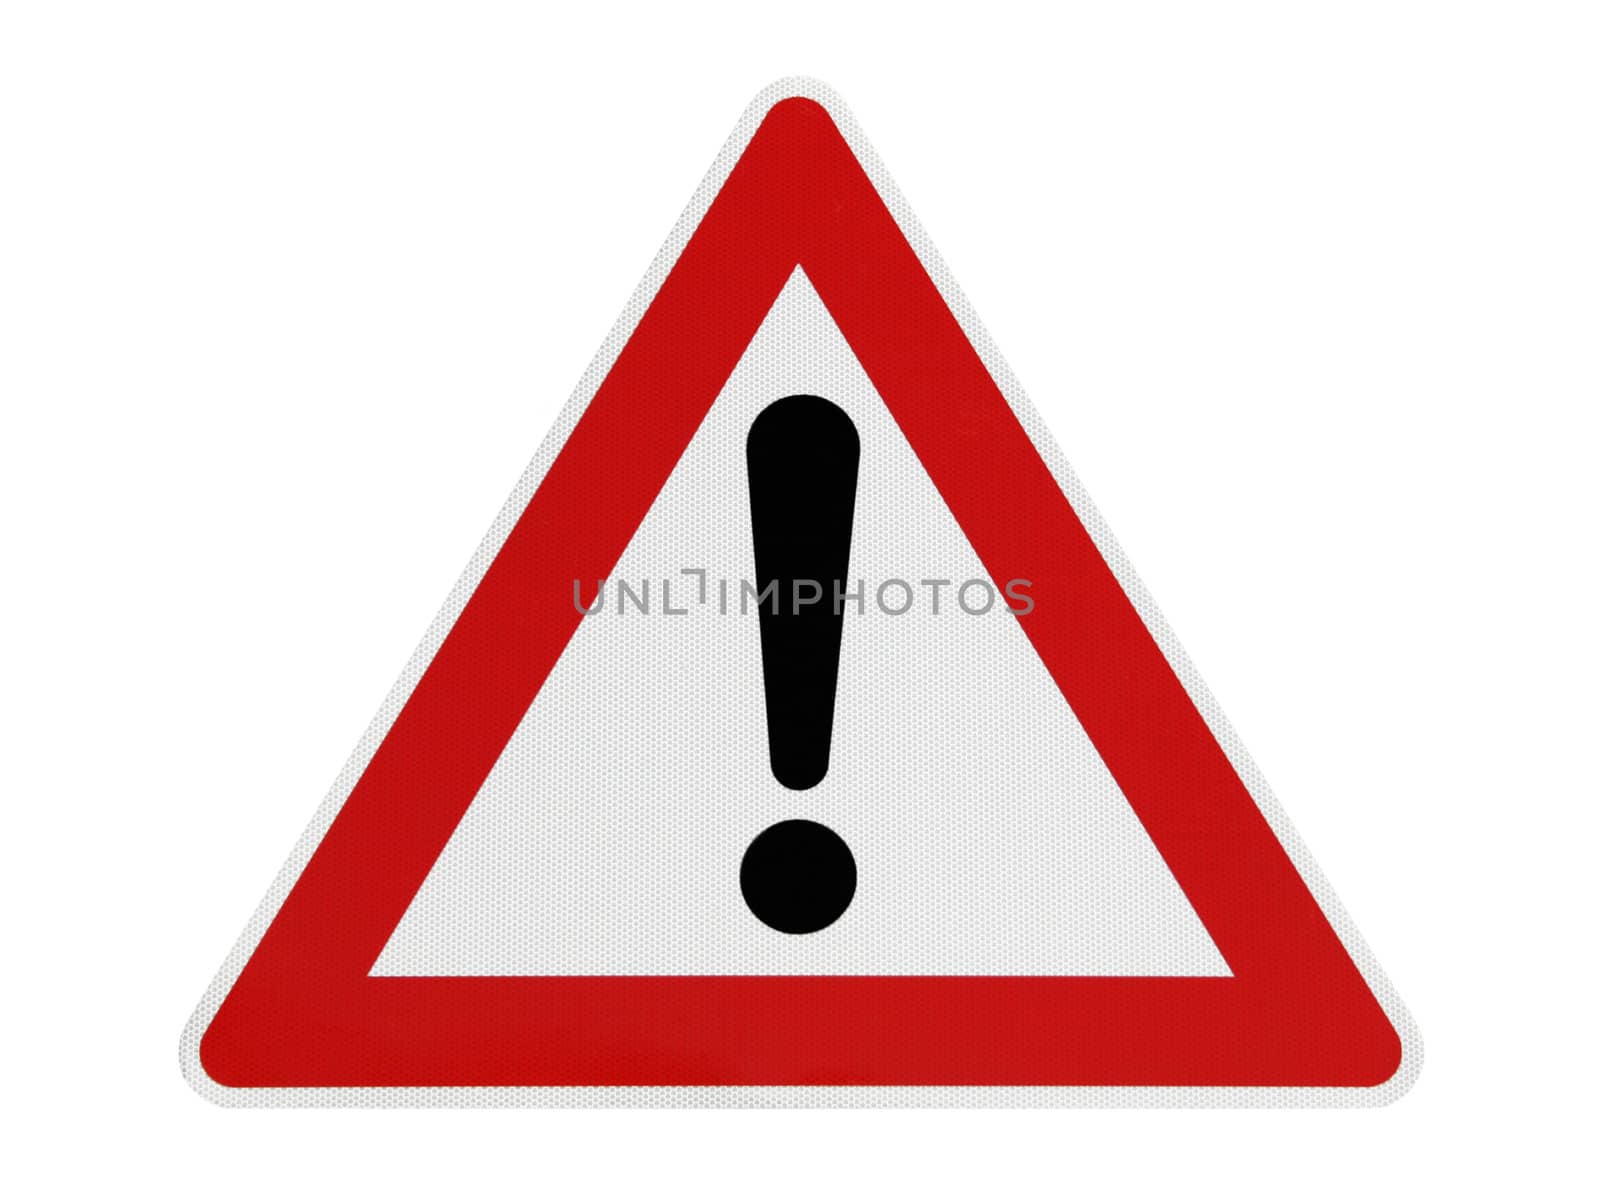 This image shows a attention road sign with white background